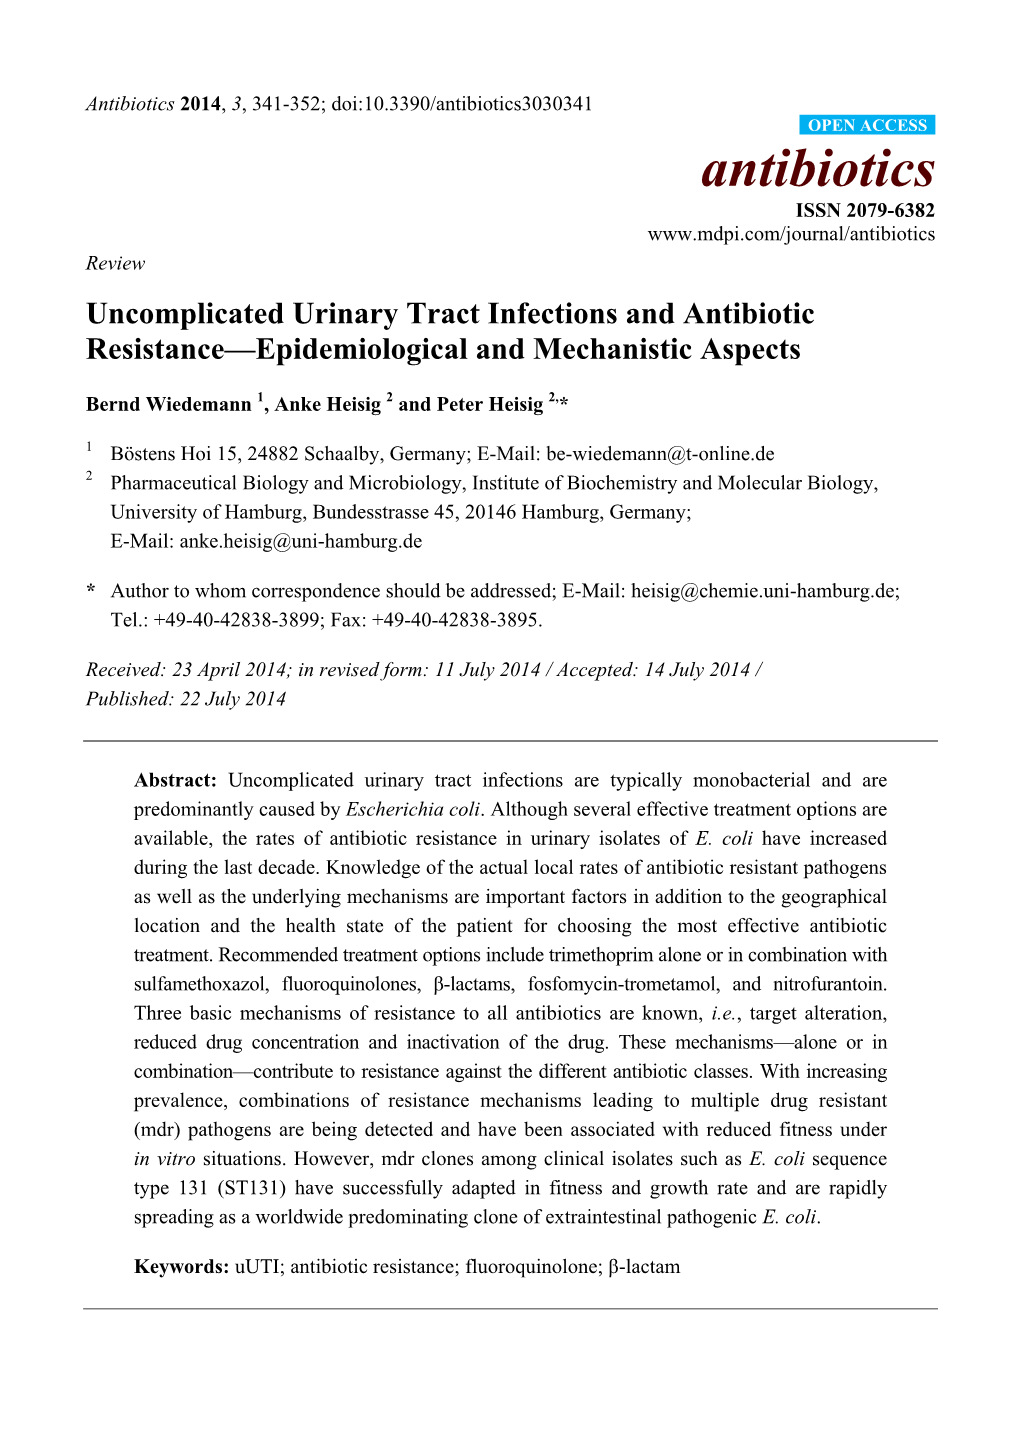 Uncomplicated Urinary Tract Infections and Antibiotic Resistance—Epidemiological and Mechanistic Aspects